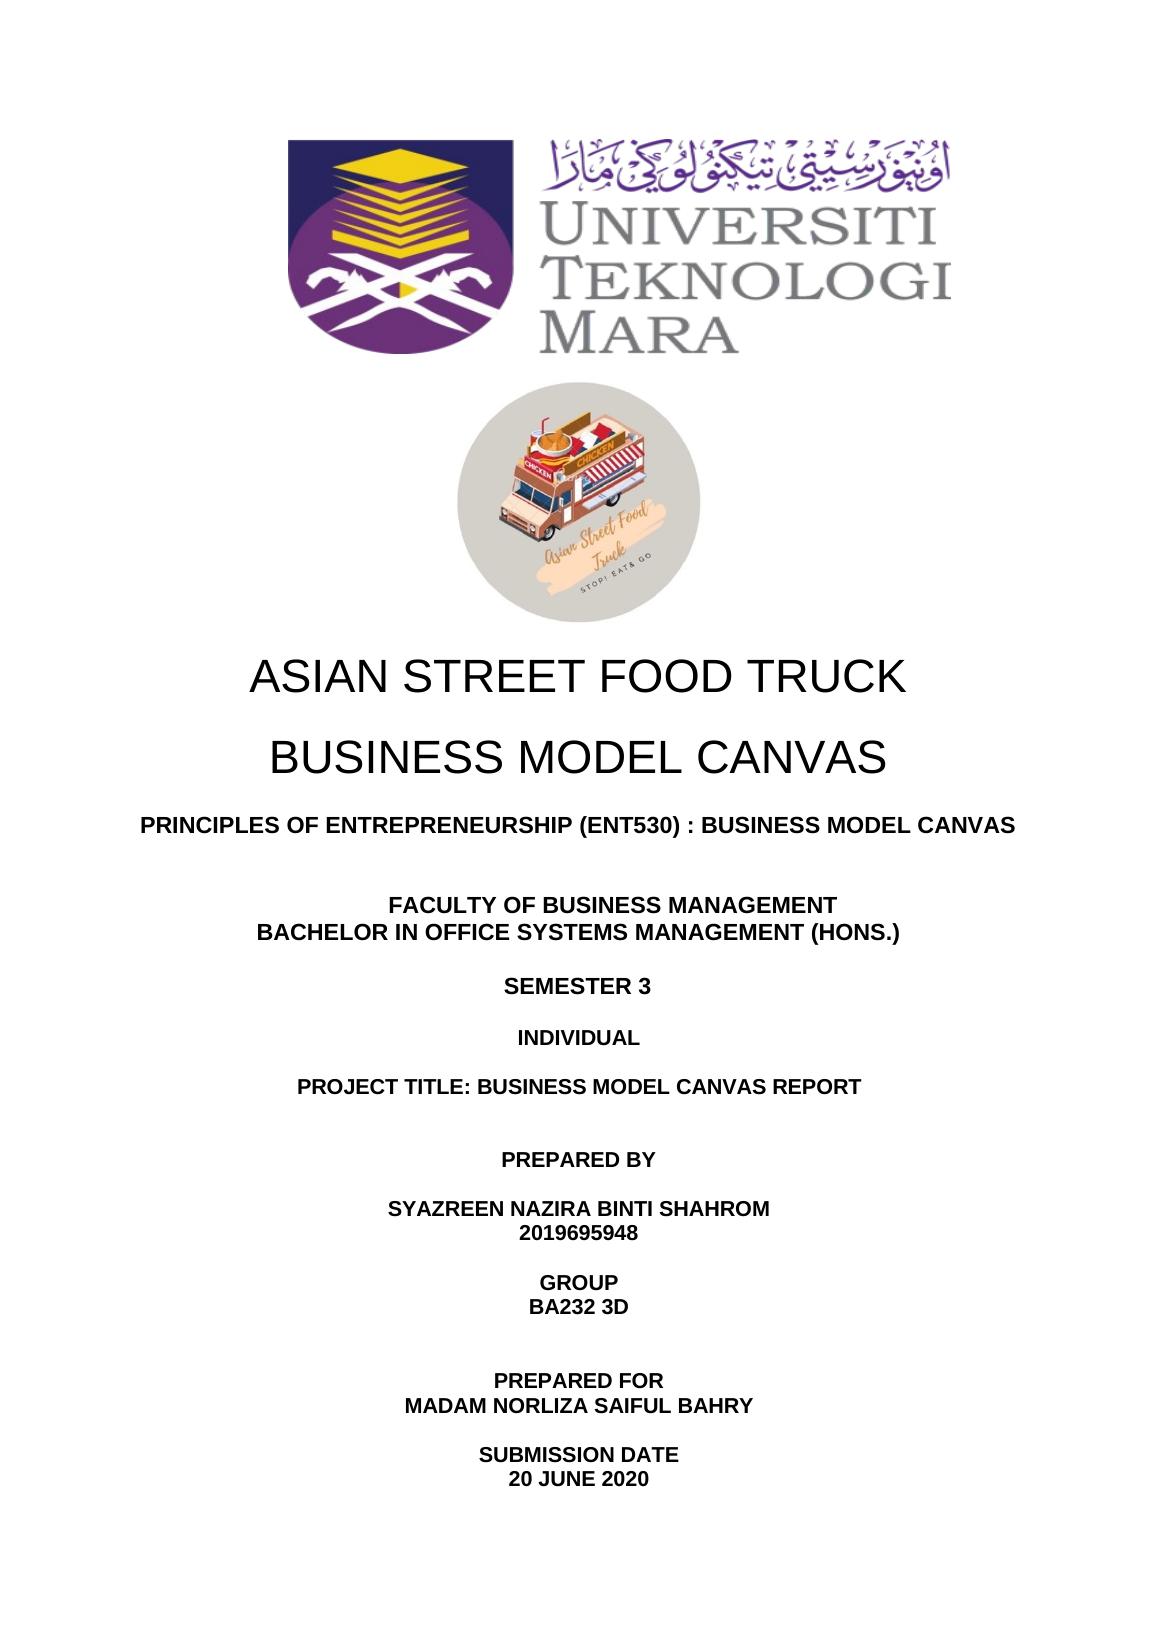 BUSINESS MODEL CANVAS OF ASIAN STREET FOOD TRUCK_1